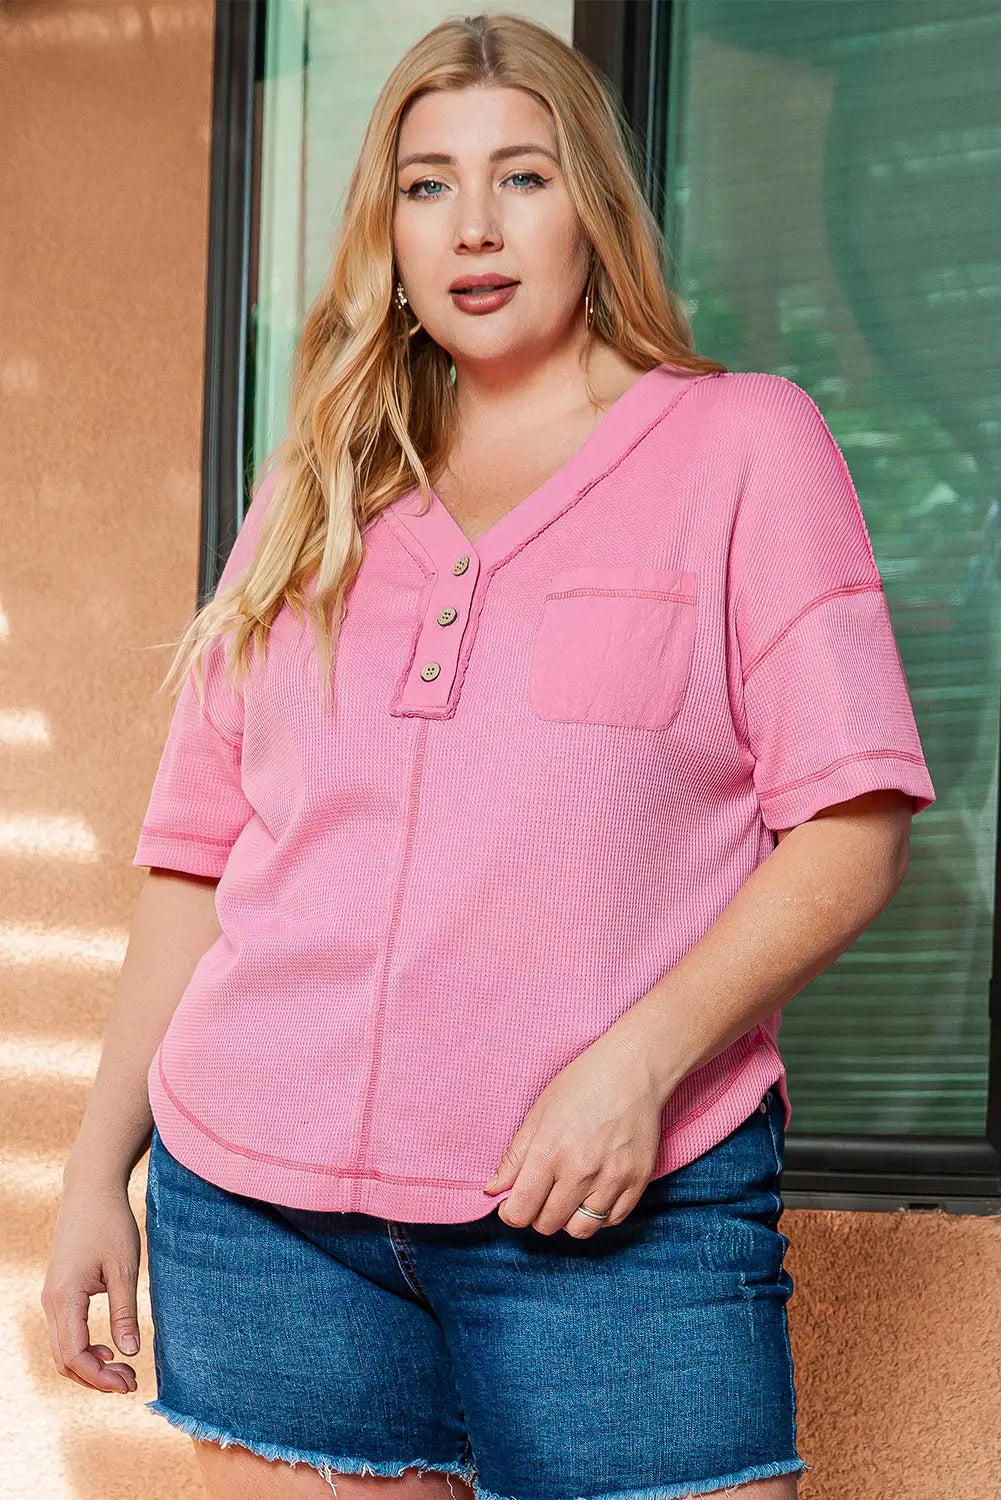 Plus size waffle knit henley t-shirt - size/plus tops/plus tops & tees